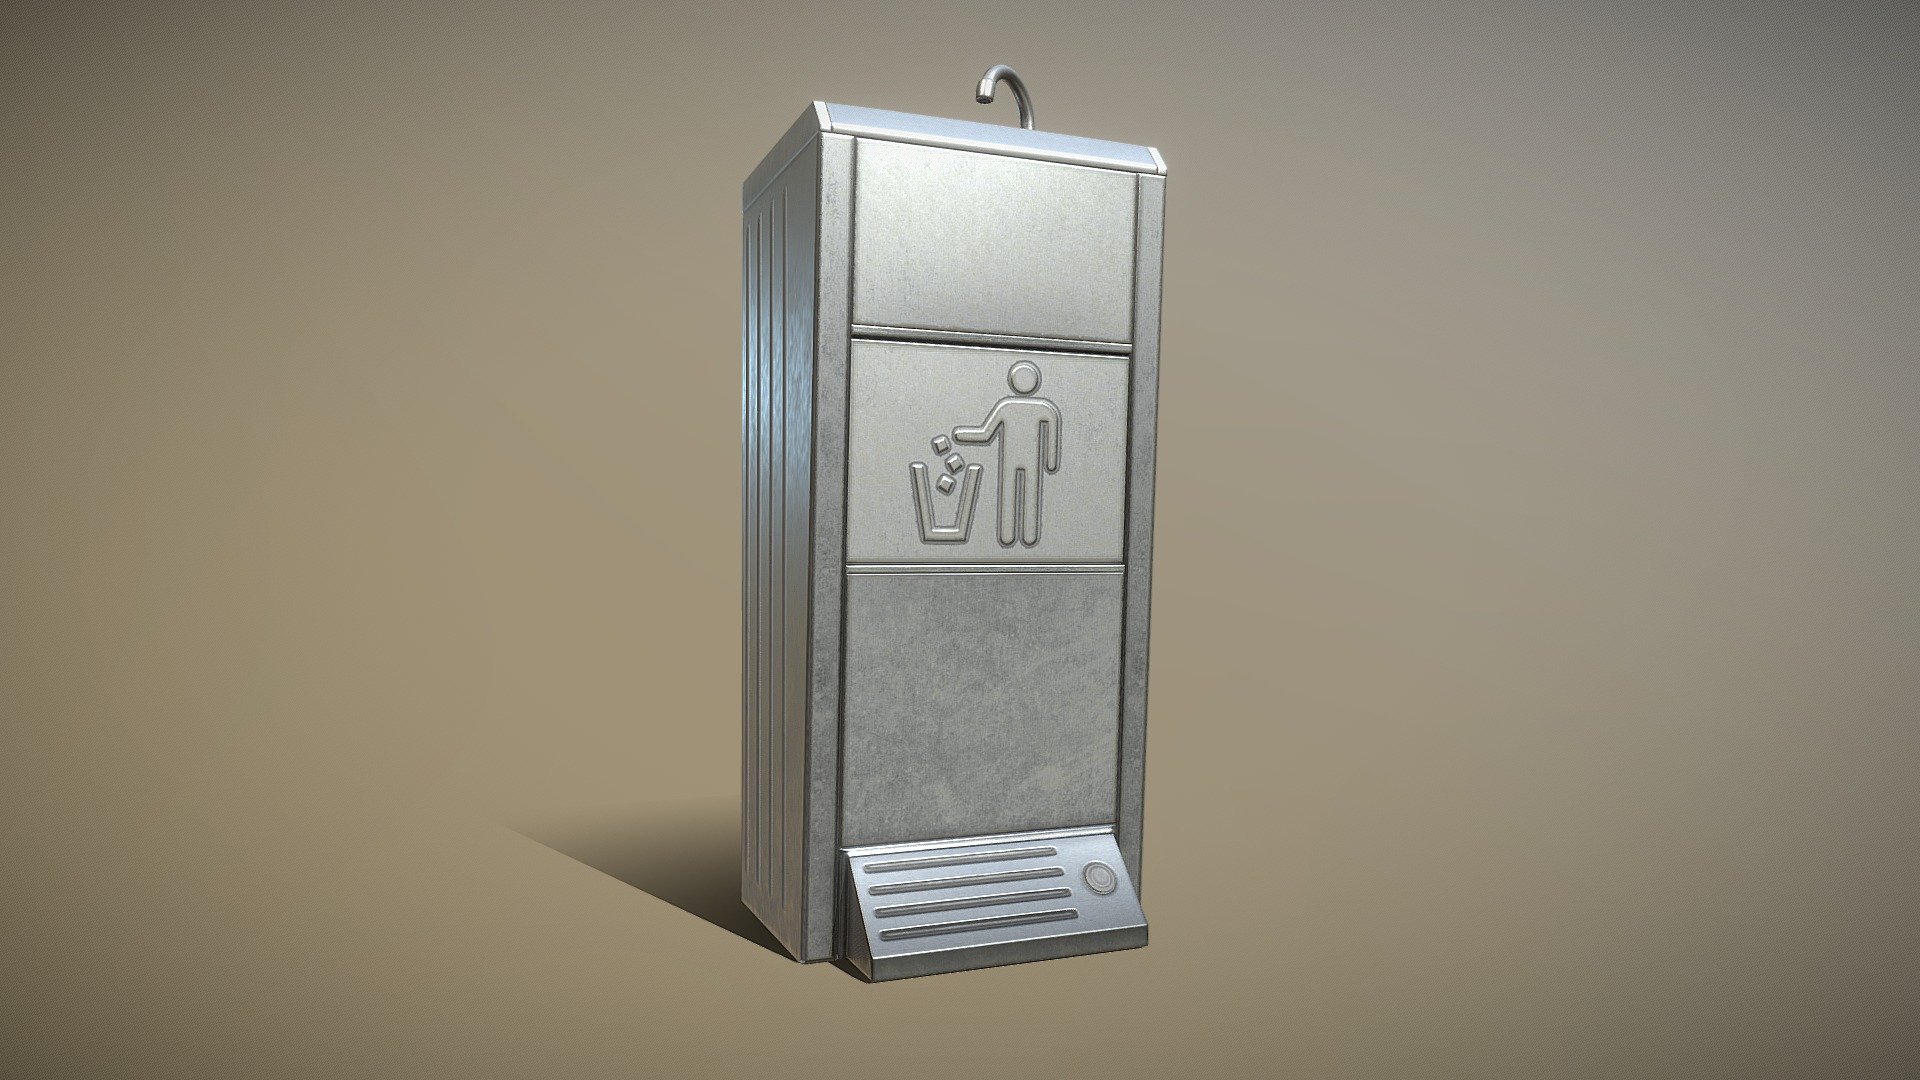 Low-poly and pbr-textured public metal sink - 16 - with trash can.





PBR-textures in 4K




Made with the modular washbasin construction kit.










Name - 16-Public-Metal-Sink-Simple-Compact-3-Stand-Trashcan   


Dimensions -  0.433m x 0.397m x 1.123m




Vertices = 1317



Edges = 3788

Polygons = 2500



3D model formats: 




Native format (*.blend)

Autodesk FBX (.fbx)

OBJ (.obj, .mtl)

glTF (.gltf, .glb)

X3D (.x3d)

Collada (.dae)

Stereolithography (.stl)

Polygon File Format (.ply)

Alembic (.abc)

DXF (.dxf)



3d-modelled and pbr-textured by 3DHaupt in Blender-2.92 - Public Metal Sink Version 16 with Trash Can - Buy Royalty Free 3D model by VIS-All-3D (@VIS-All) 3d model